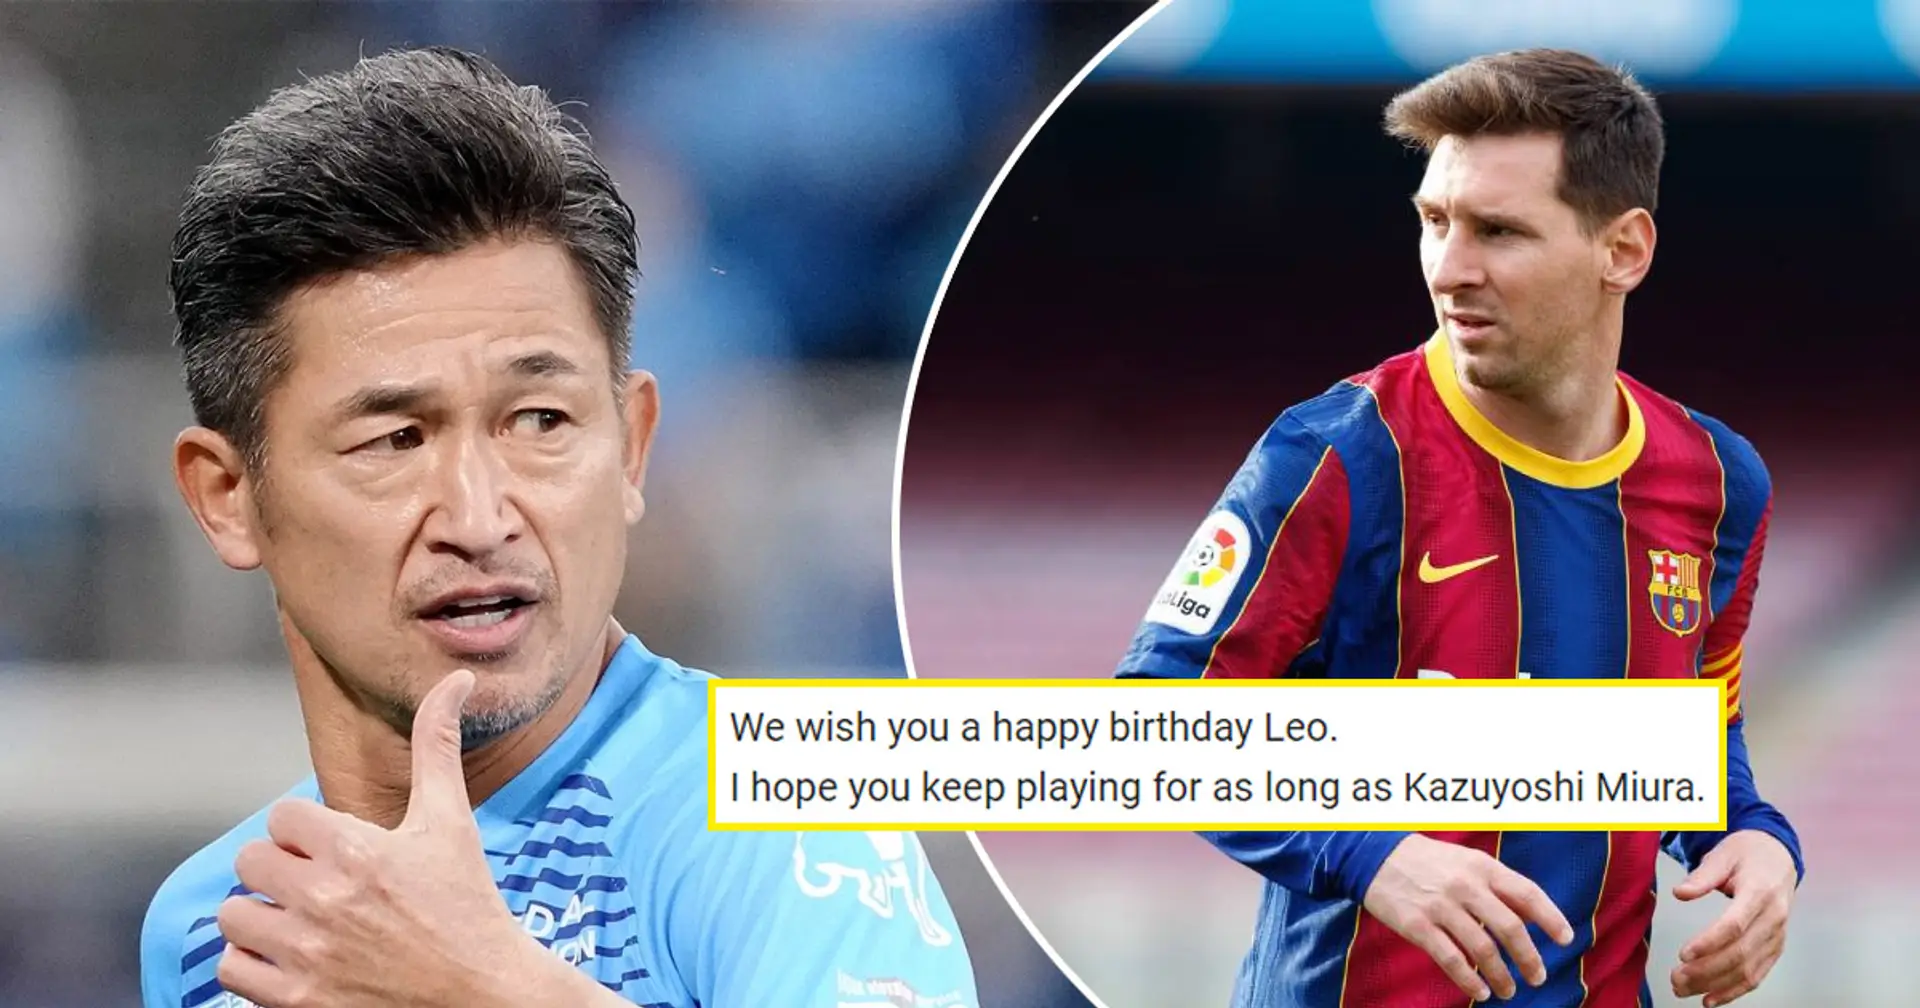 Fans wish Messi to keep playing for as long as Kazuyoshi Miura - who is the Japanese? You asked - we answered